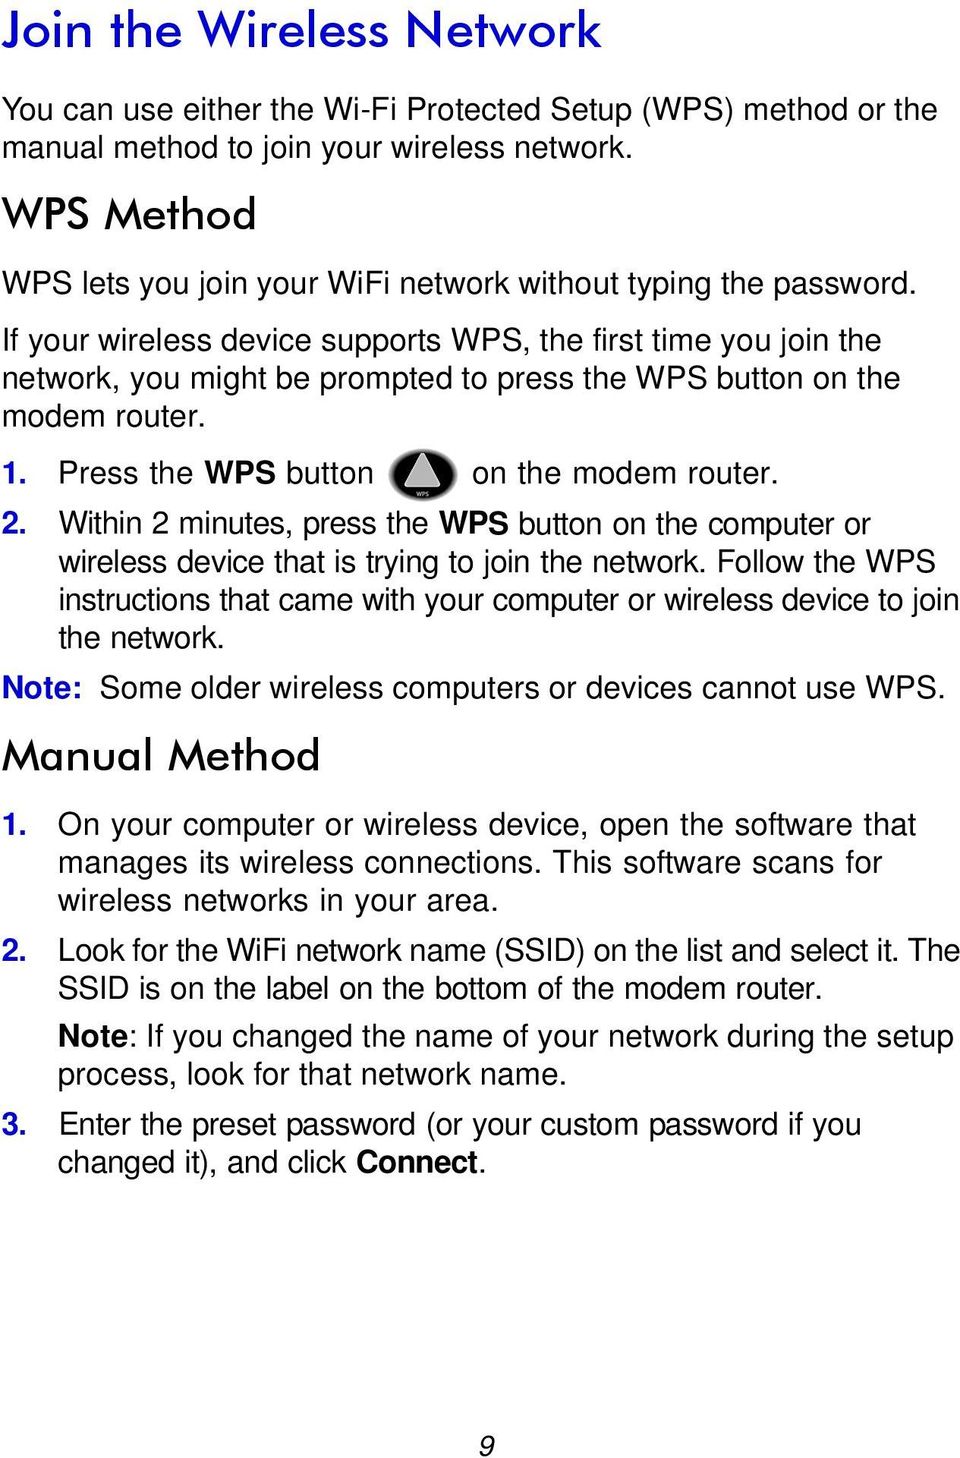 If your wireless device supports WPS, the first time you join the network, you might be prompted to press the WPS button on the modem router. 1. Press the WPS button on the modem router. 2.